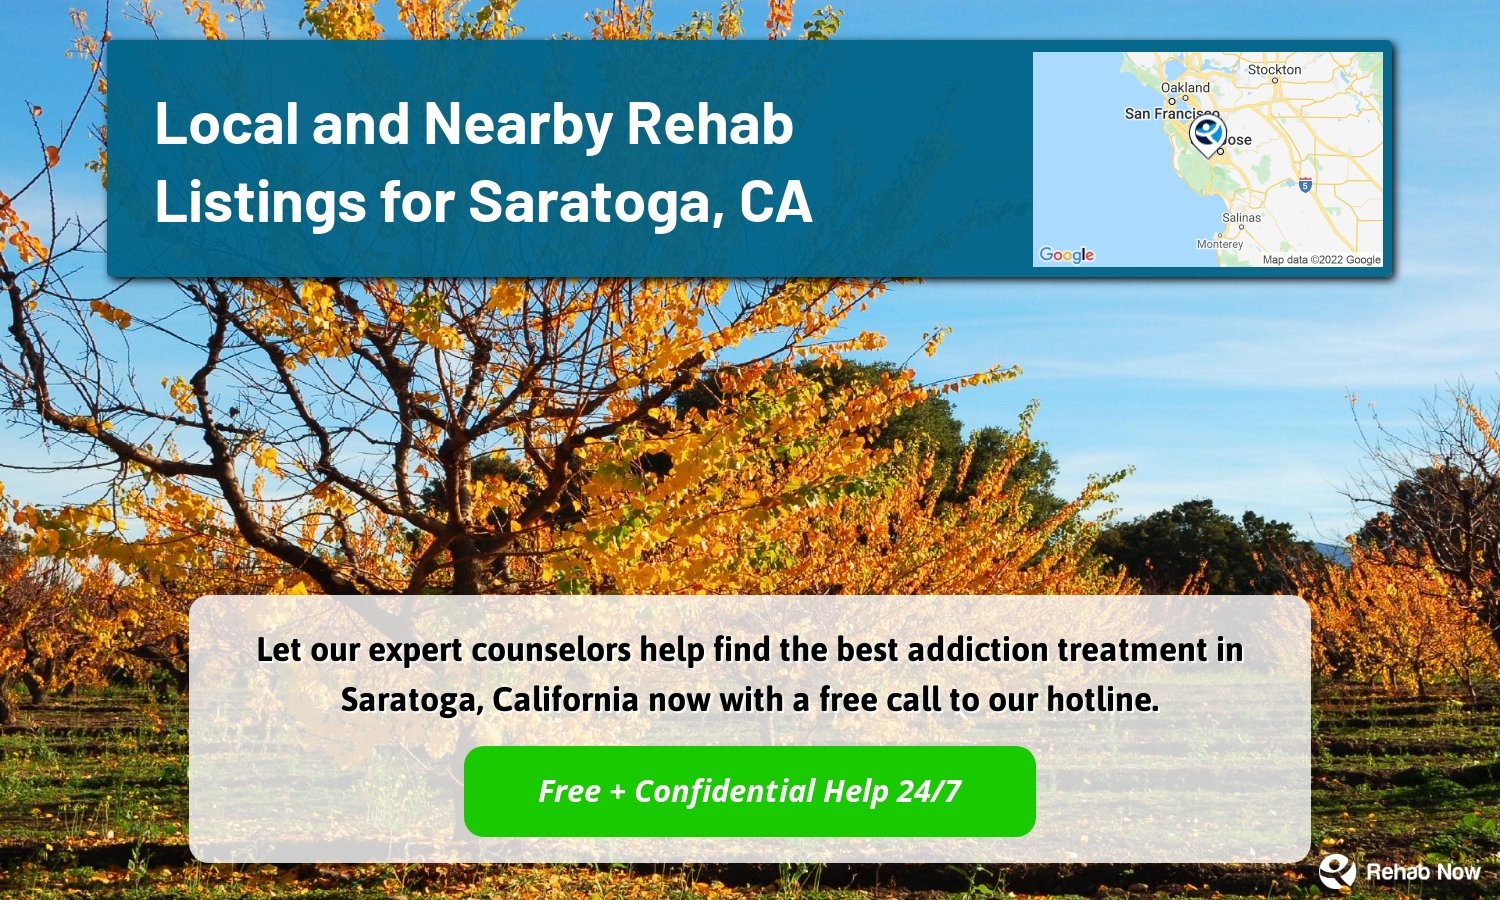 Let our expert counselors help find the best addiction treatment in Saratoga, California now with a free call to our hotline.